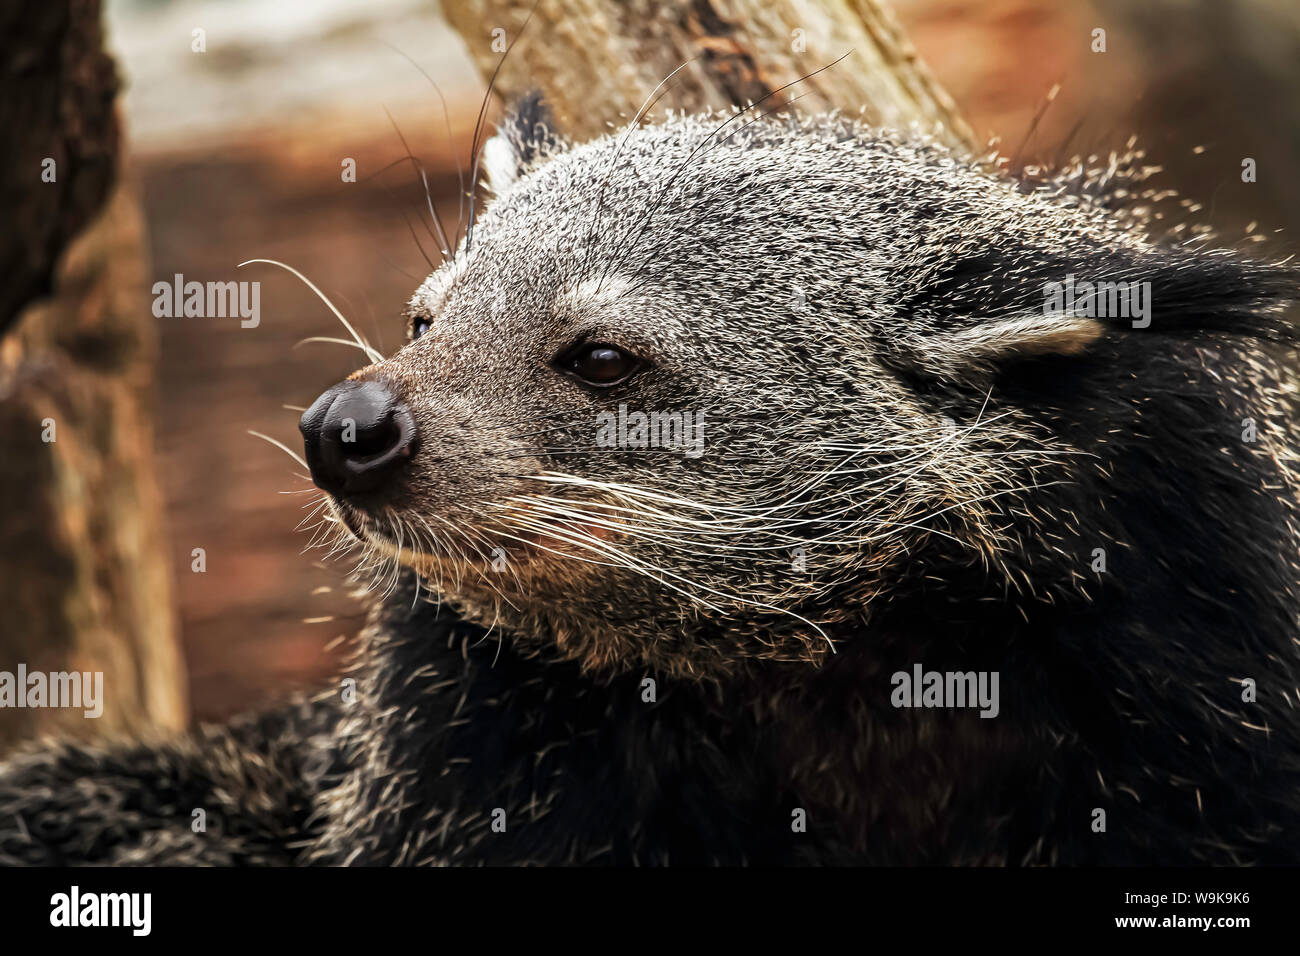 The binturong, also known as bearcat, is a viverrid native to South and Southeast Asia. This image was taken at Longleat Safari Park in the UK. Stock Photo